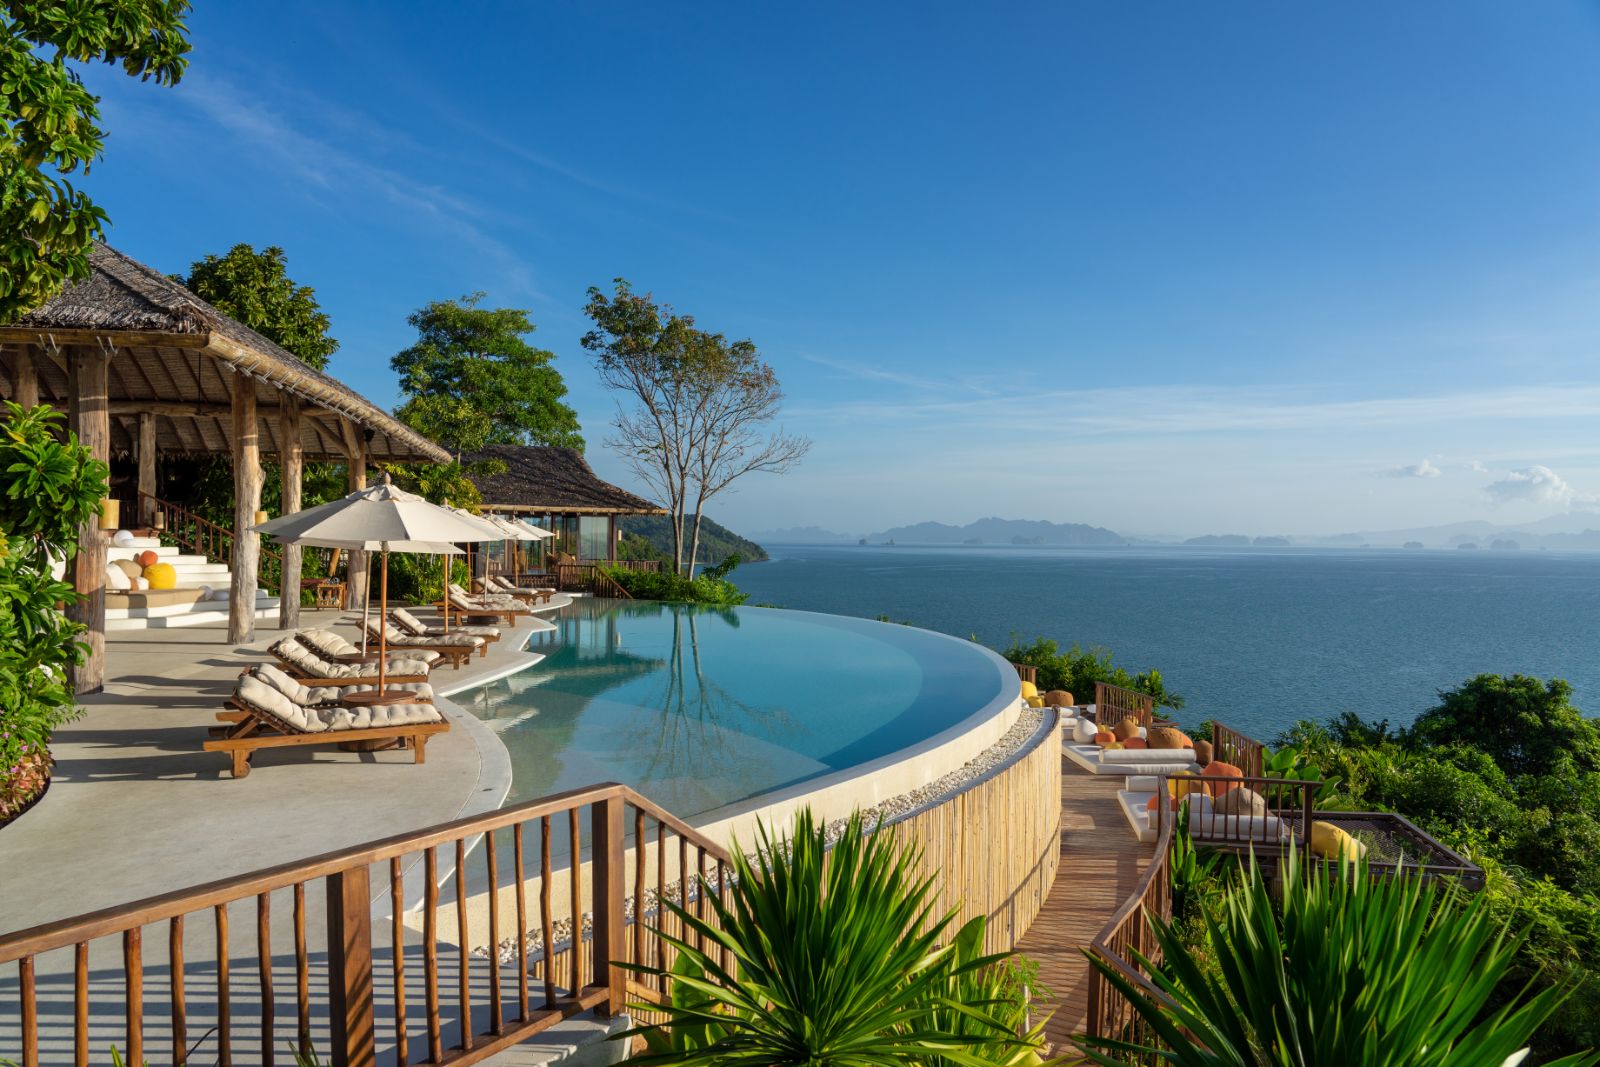 Swimming pool and lounge area at The Hilltop Bar  at luxury resort Six Senses Yao Noi 